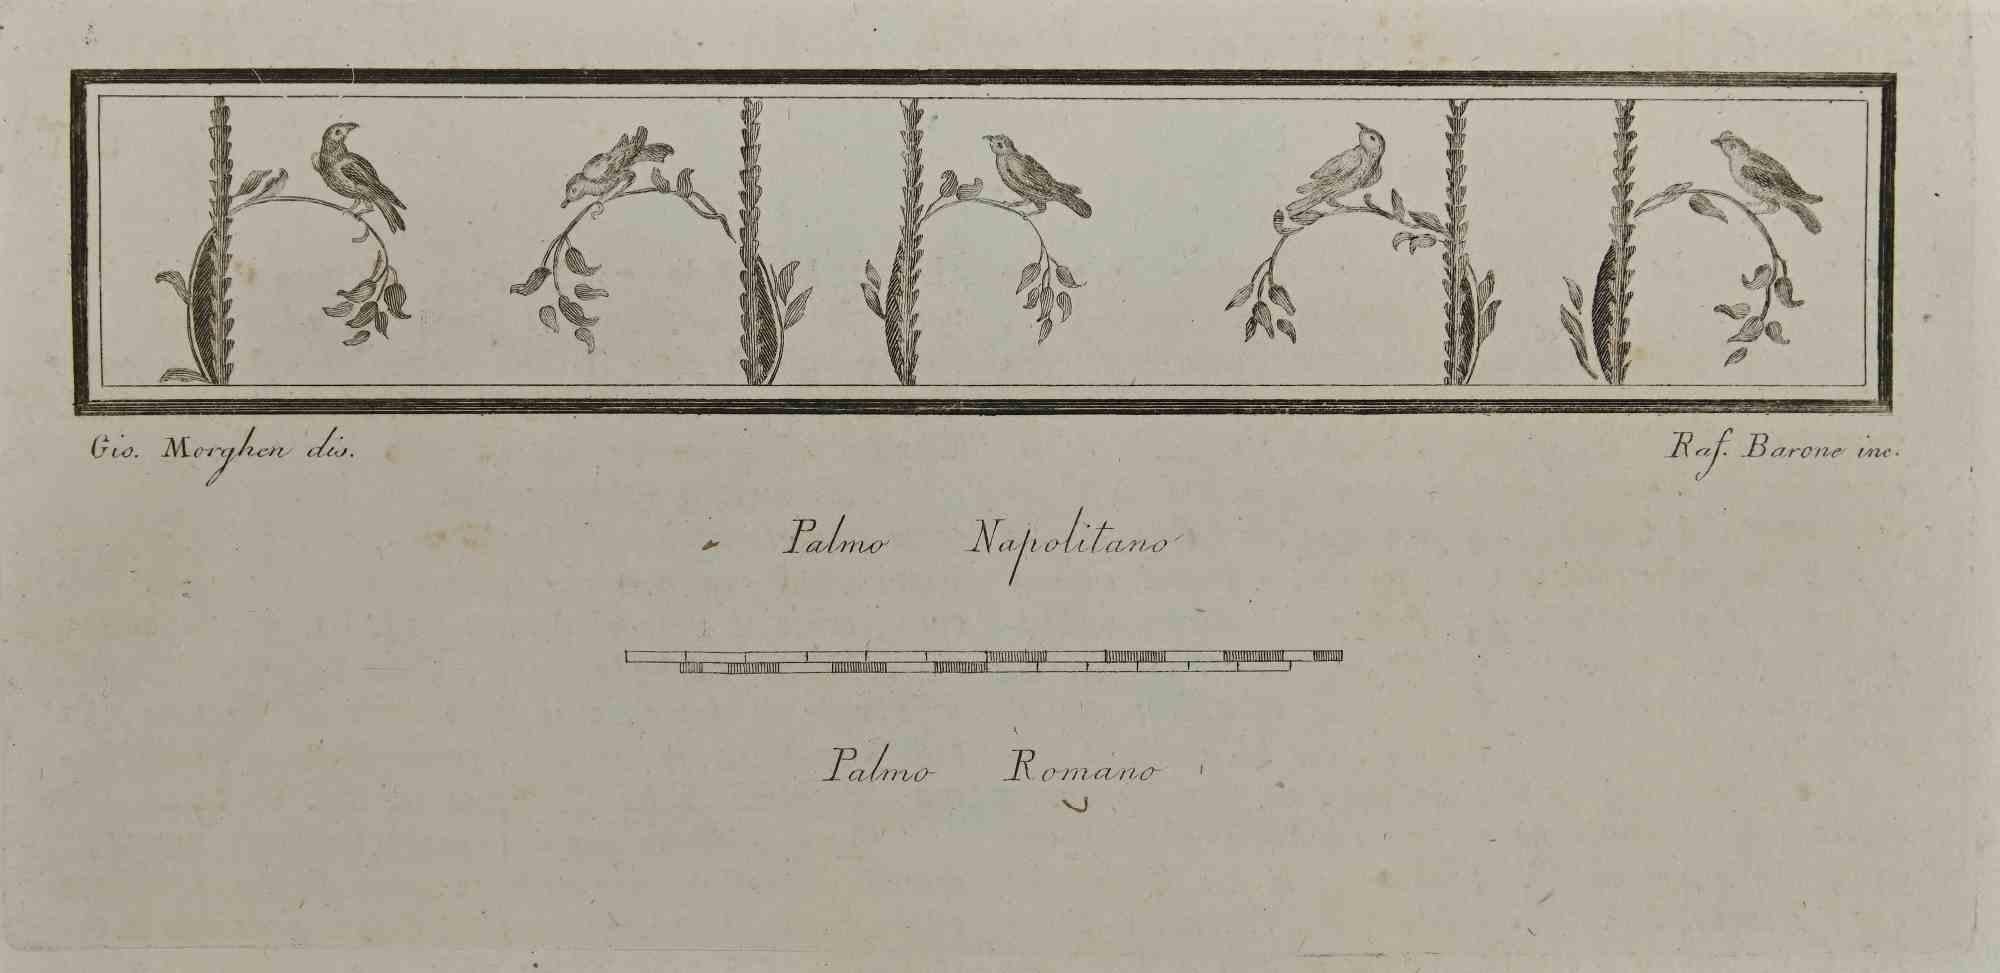 Sparrows On Boughs, Roman Fresco from "Antiquities of Herculaneum" is an etching on paper realized by Raffaele Barone in the 18th Century.

Signed on the plate.

Good conditions.

The etching belongs to the print suite “Antiquities of Herculaneum